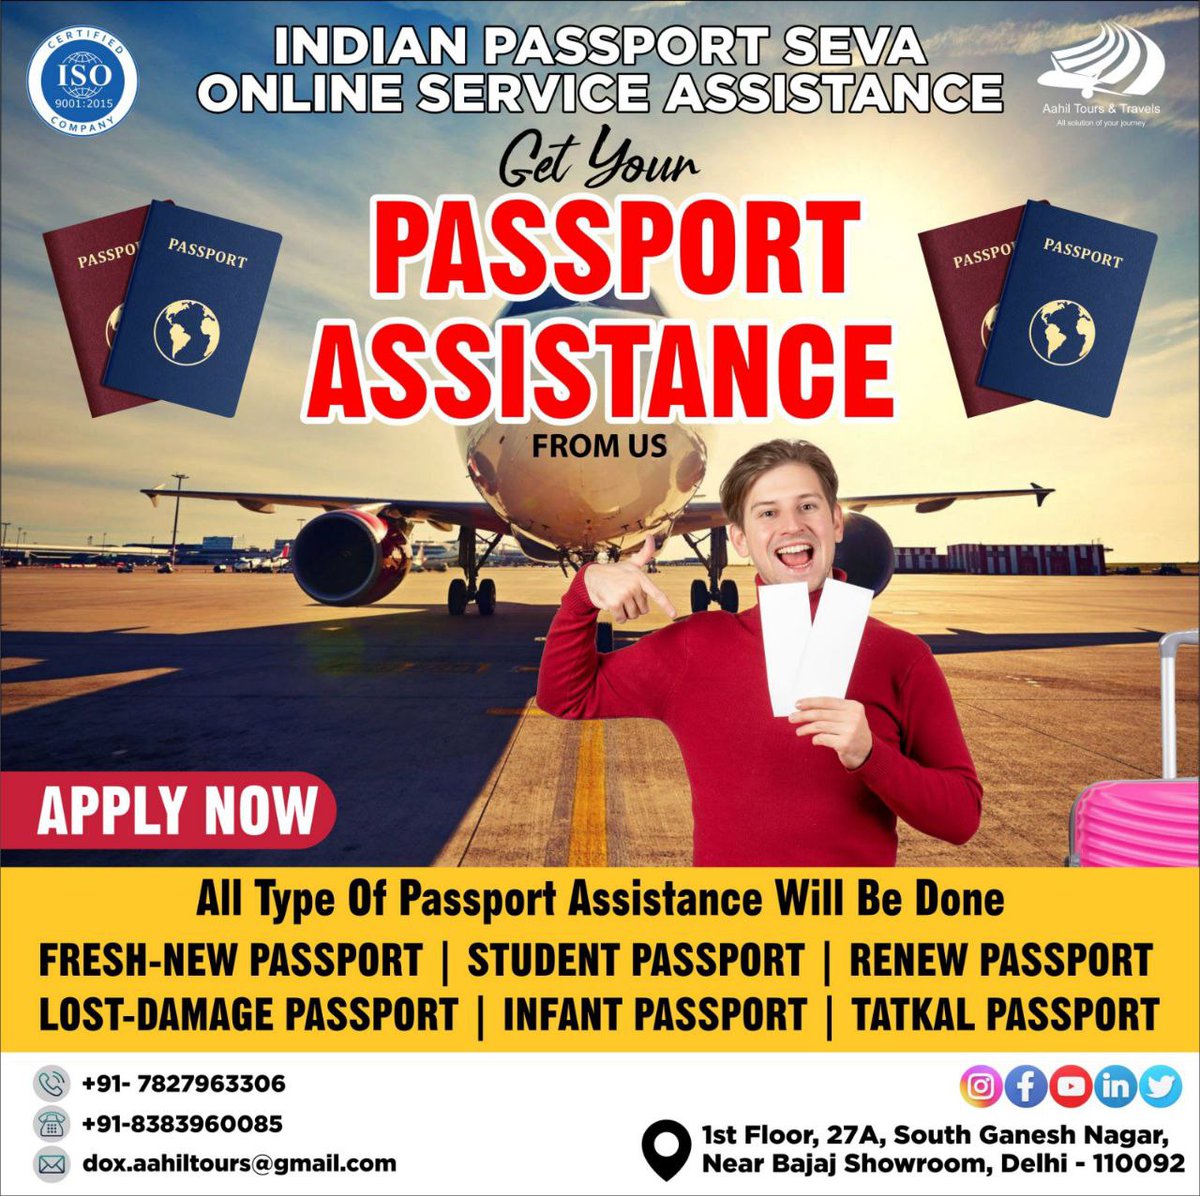 Get best rate and fast service in a single call. Details are mentioned in flyer. For more information click on the link wa.me/918383960085
#aahiltour 
#assistanceservices 
#newpassport 
#minorpassport 
#tatkalpassport 
#passportrenewal 
#contactusformoreinfo